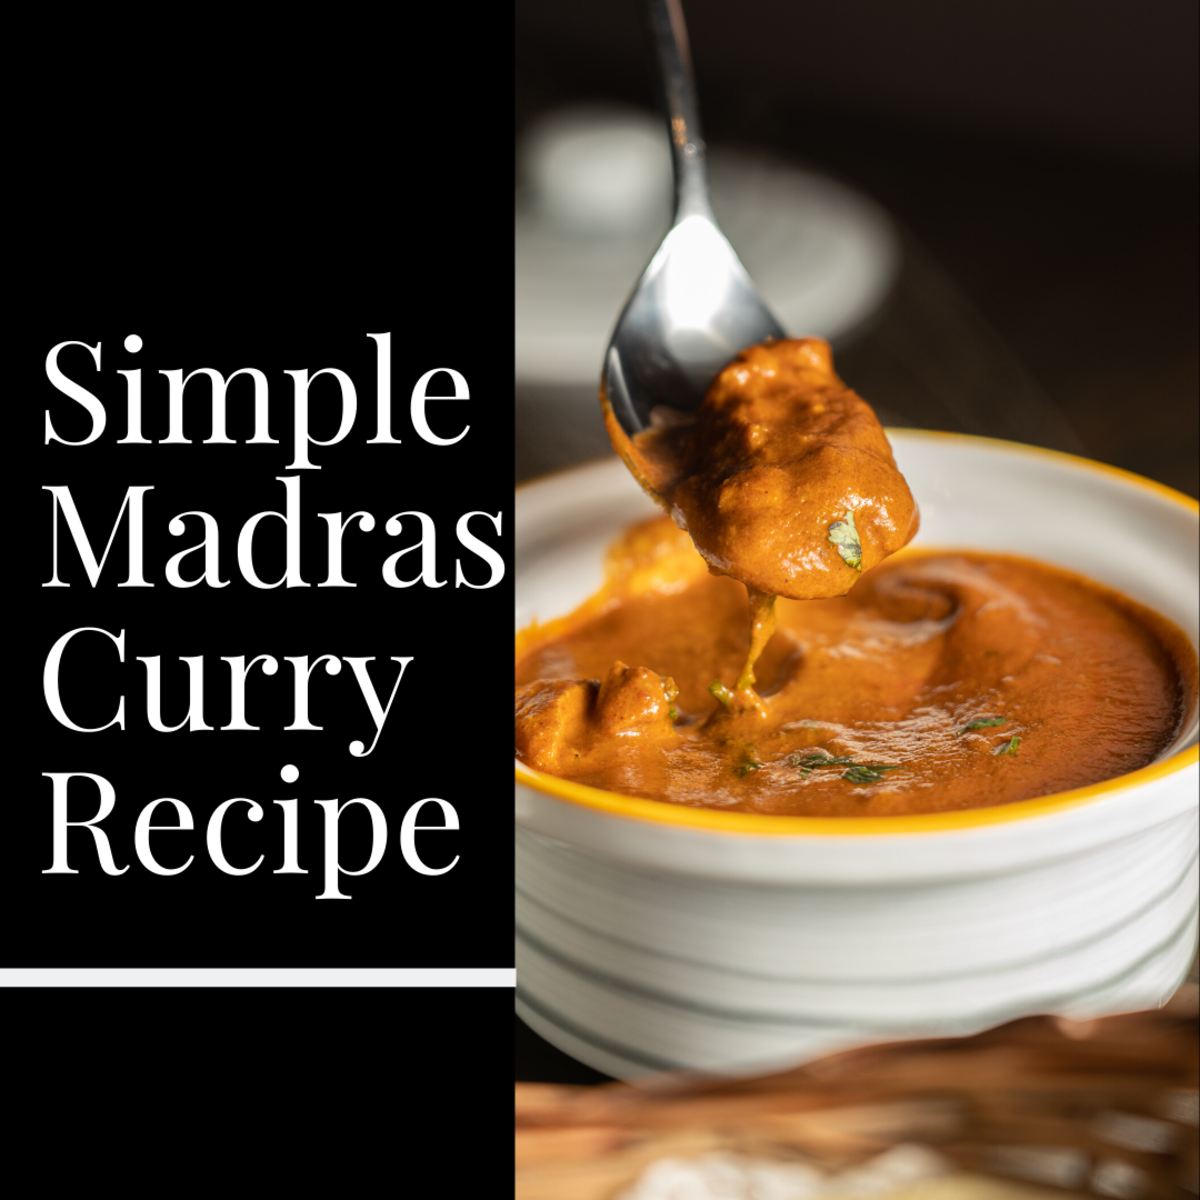 This madras curry recipe is absolutely delicious!